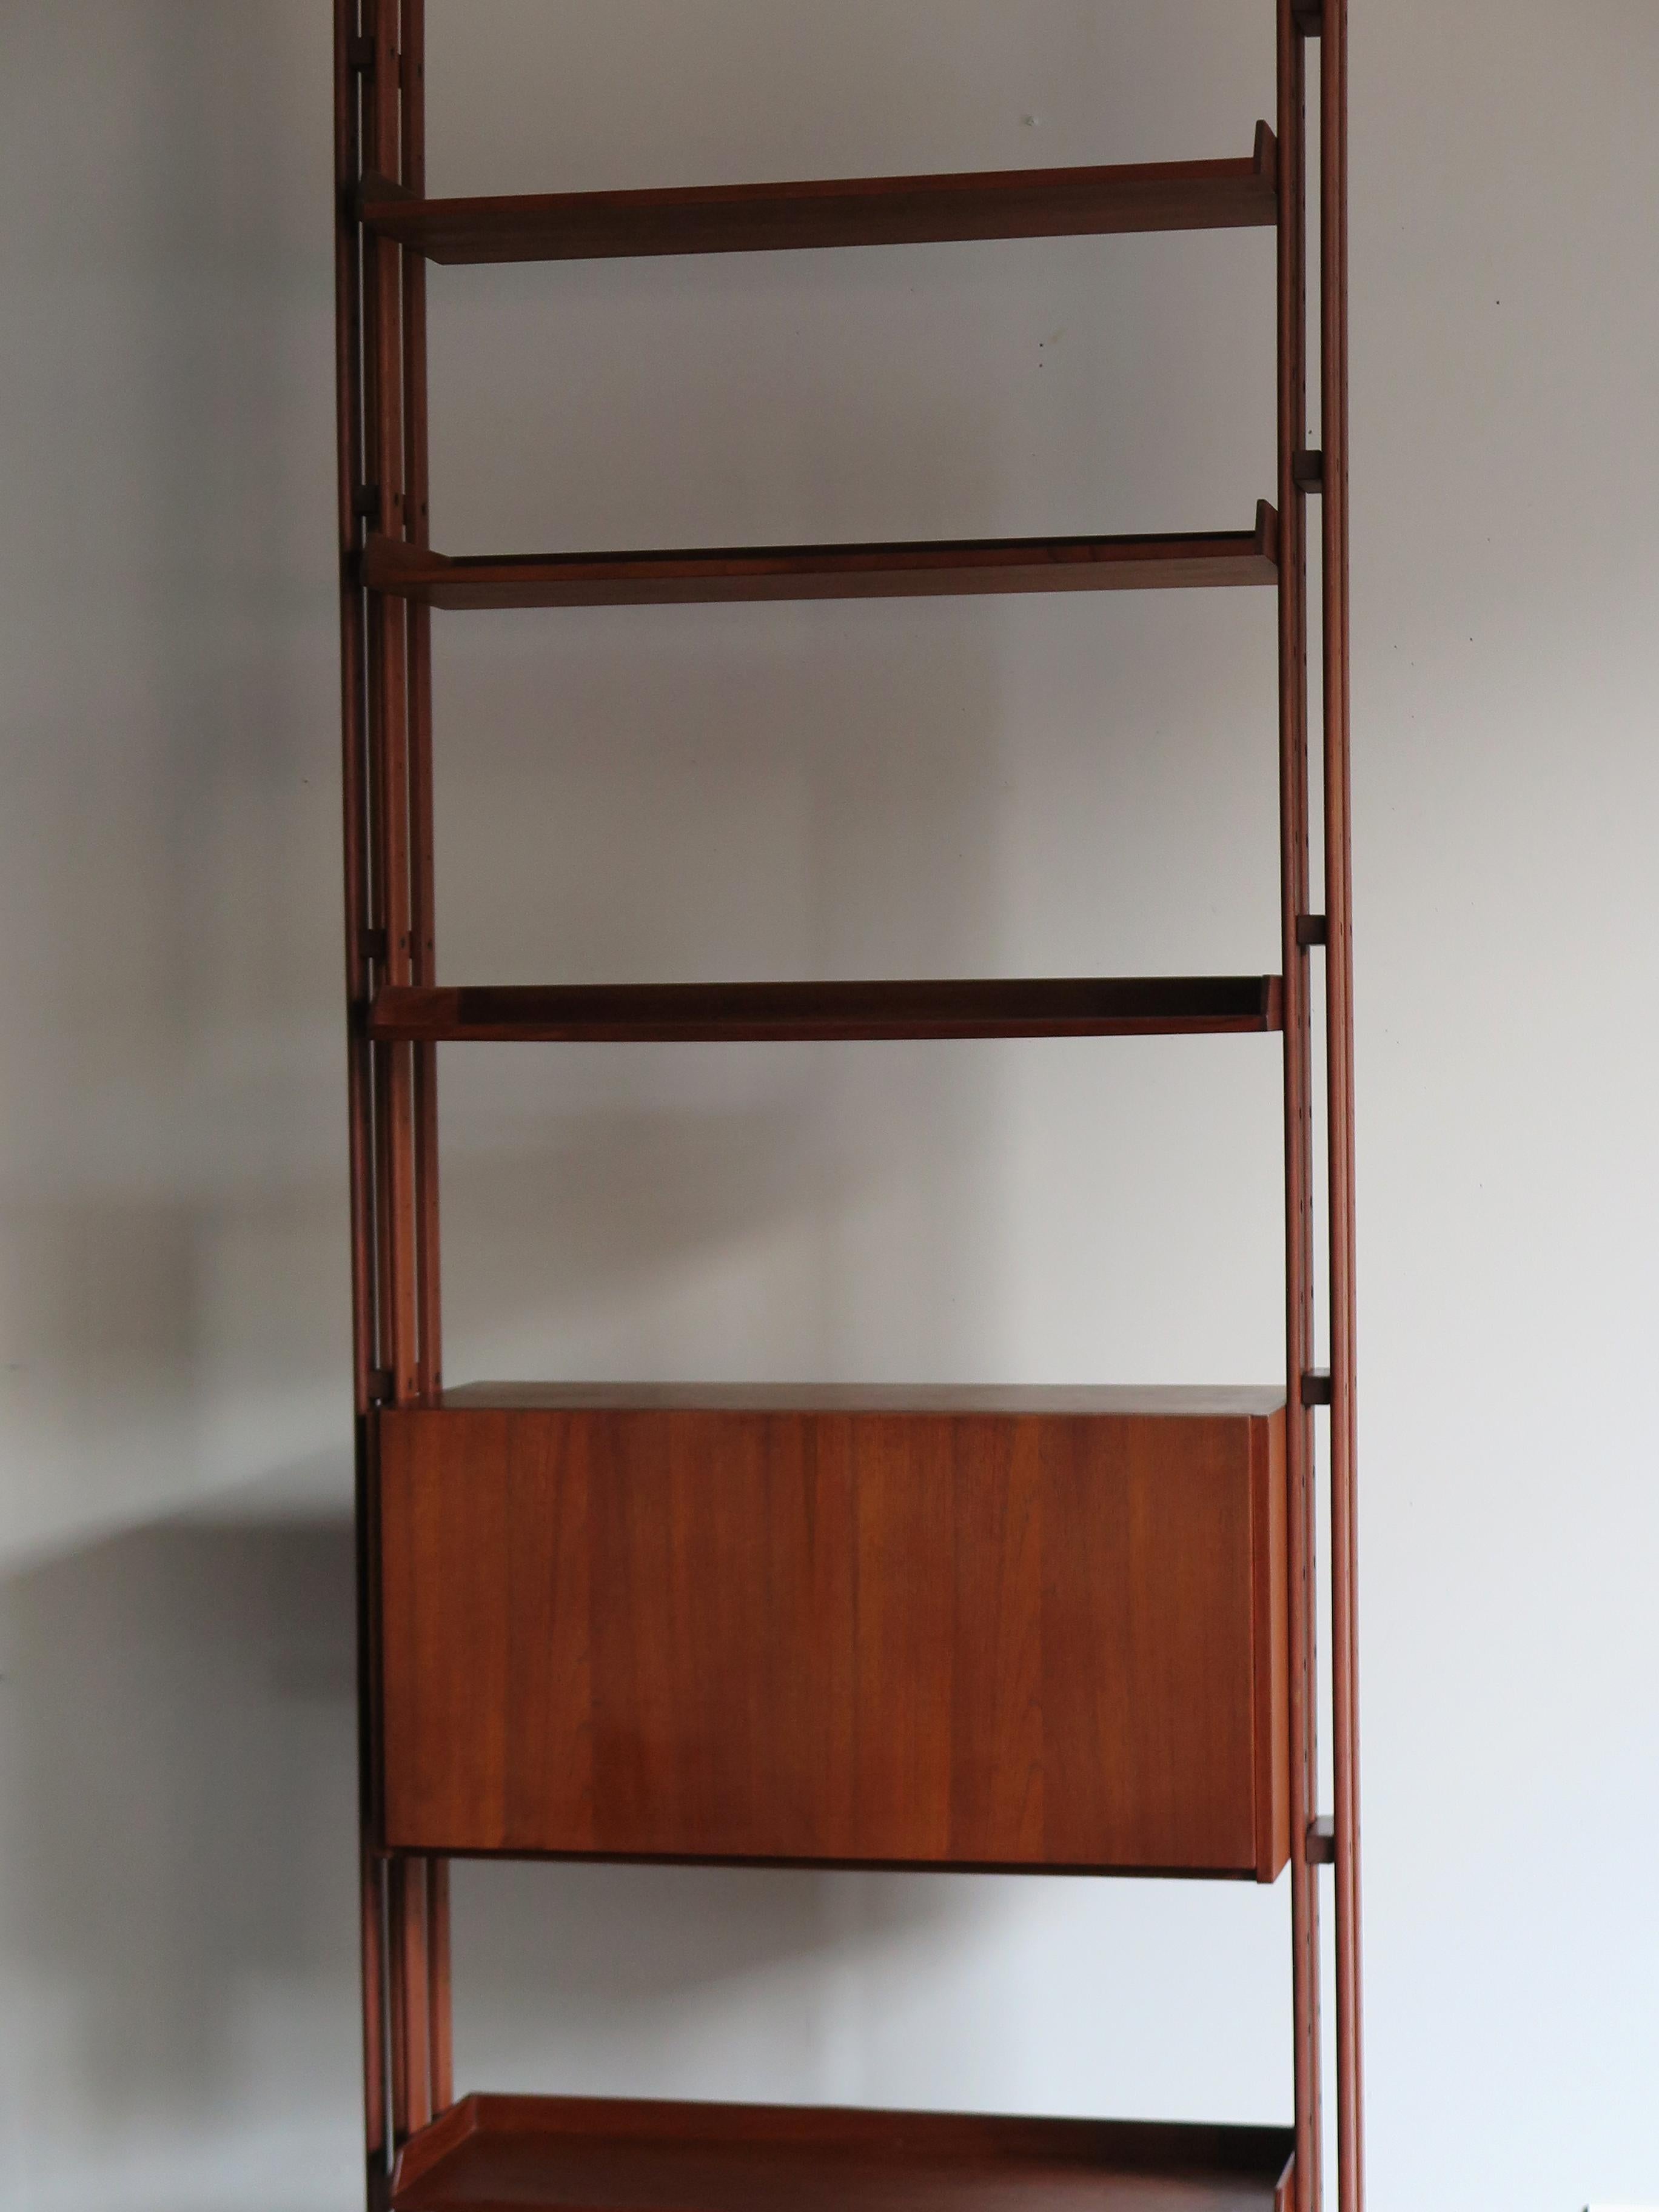 Italian very famous library shelves, adjustable with uprights set on the floor and ceiling, designed by Franco Albini in 1956 for Poggi Pavia, midcentury design.
Shelves and container adjustable in height.
Uprights, containers and shelves made of